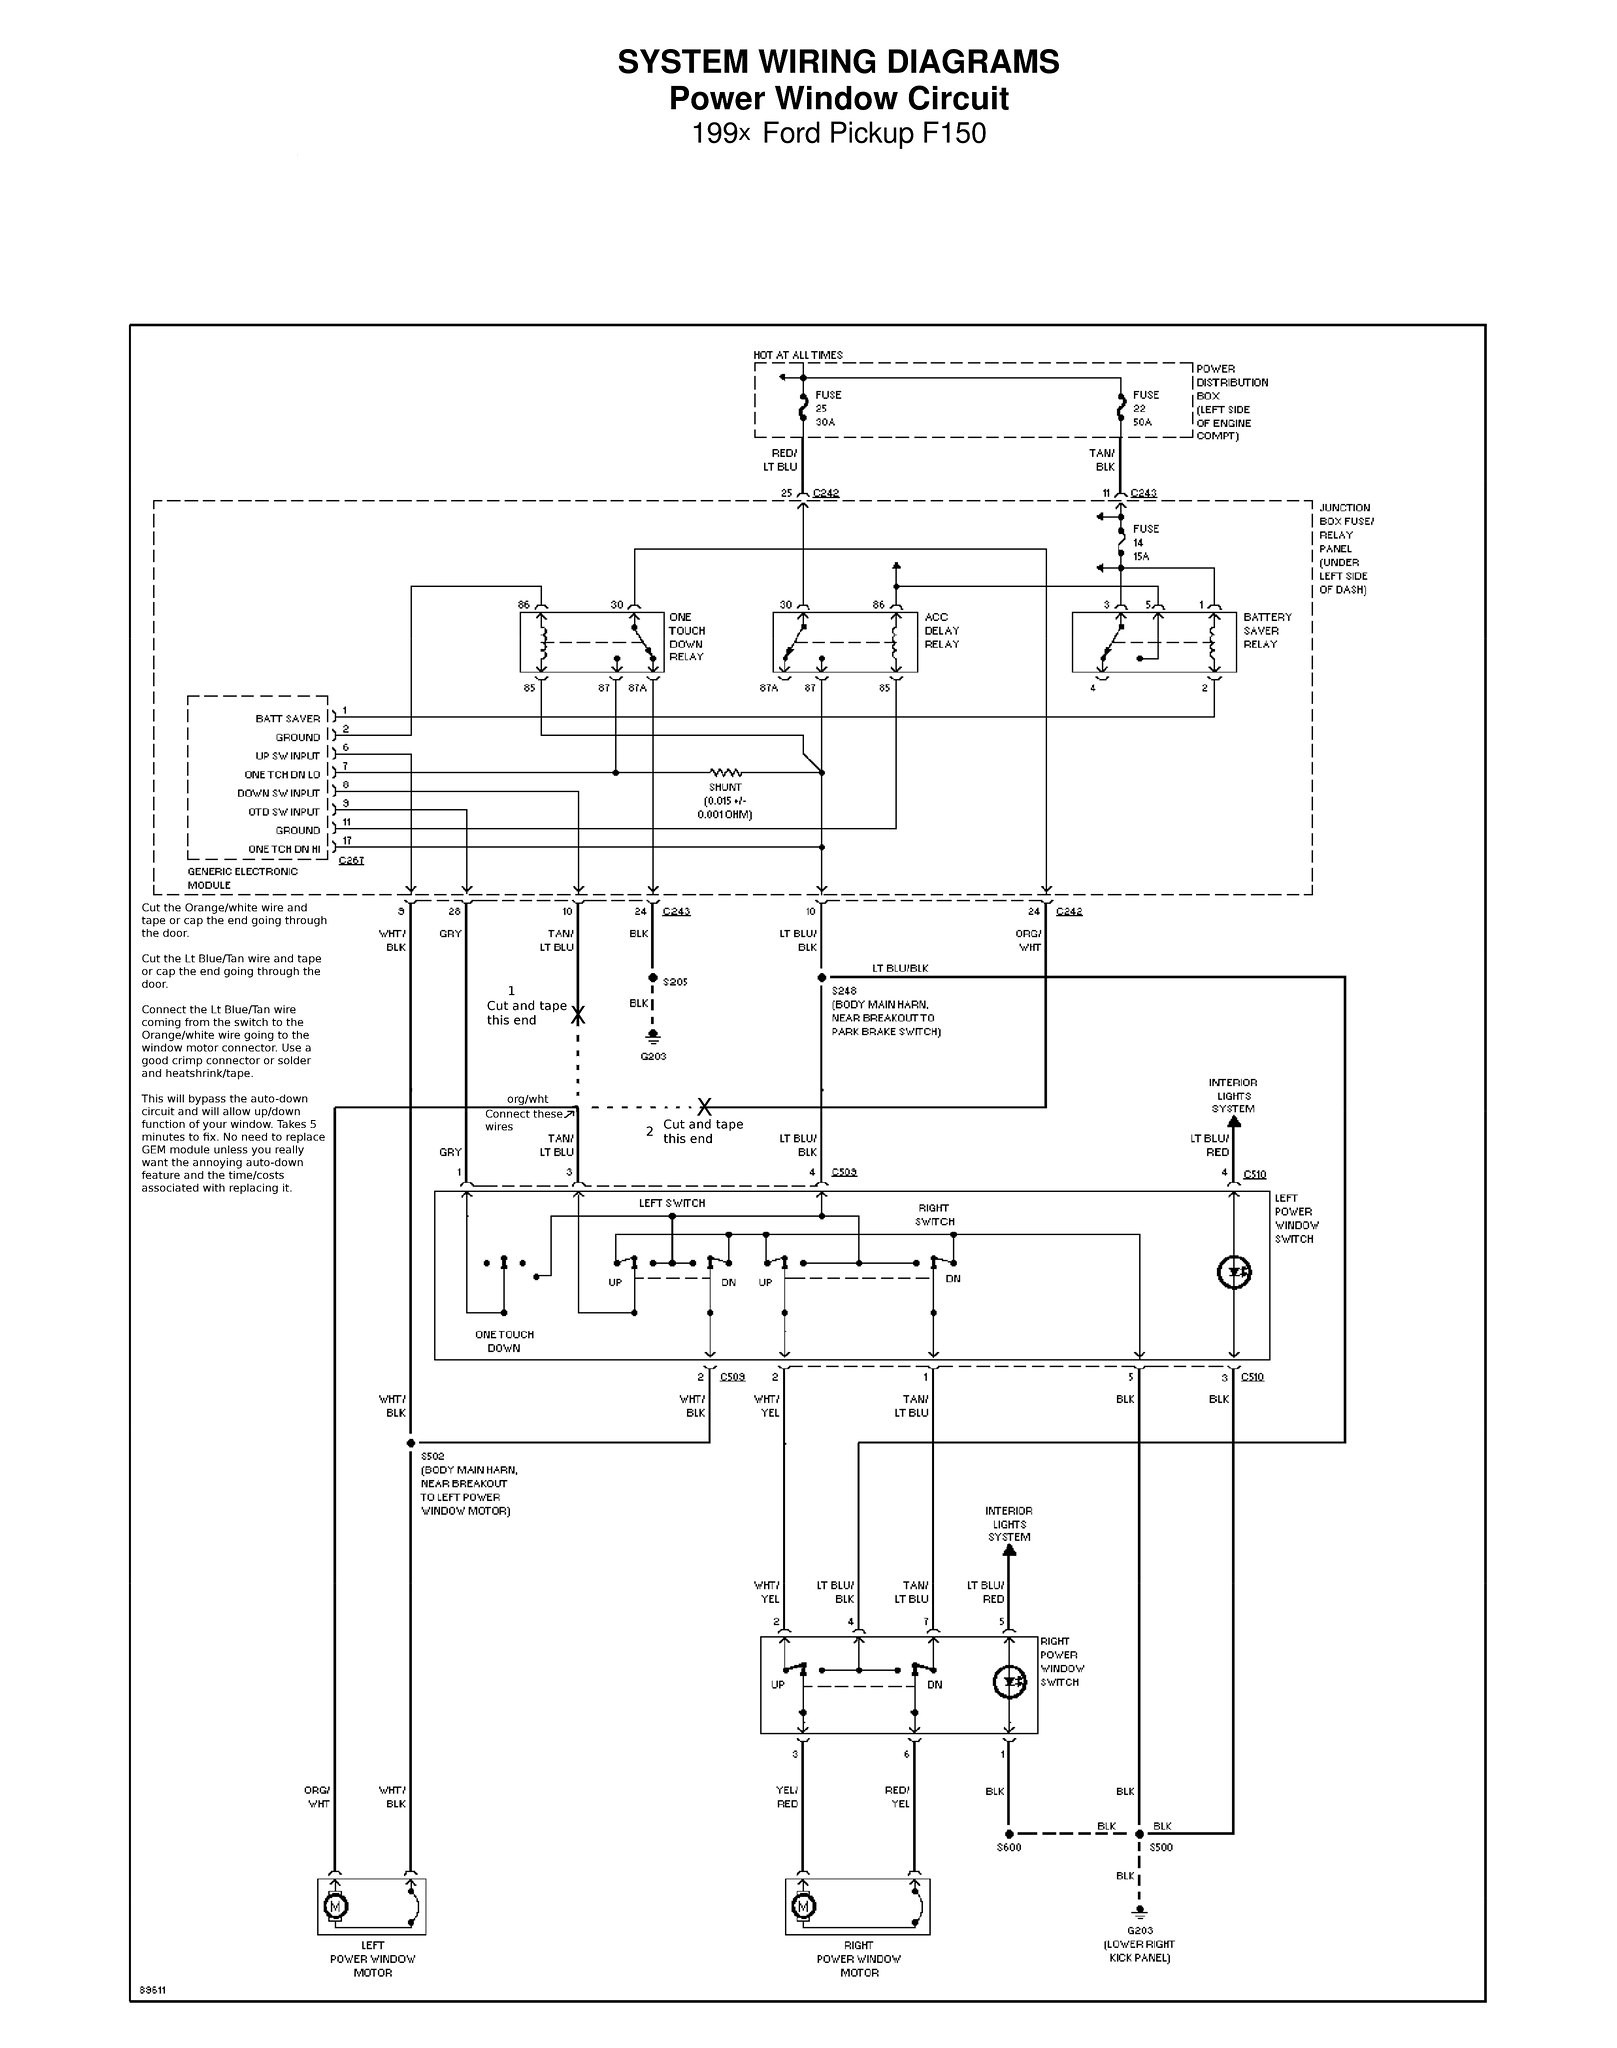 1995 ford F150 Electric Fuel Pump Wiring Schematic 2001 F150 Wiring Diagram Two Wires Wiring Diagram Schematic Of 1995 ford F150 Electric Fuel Pump Wiring Schematic